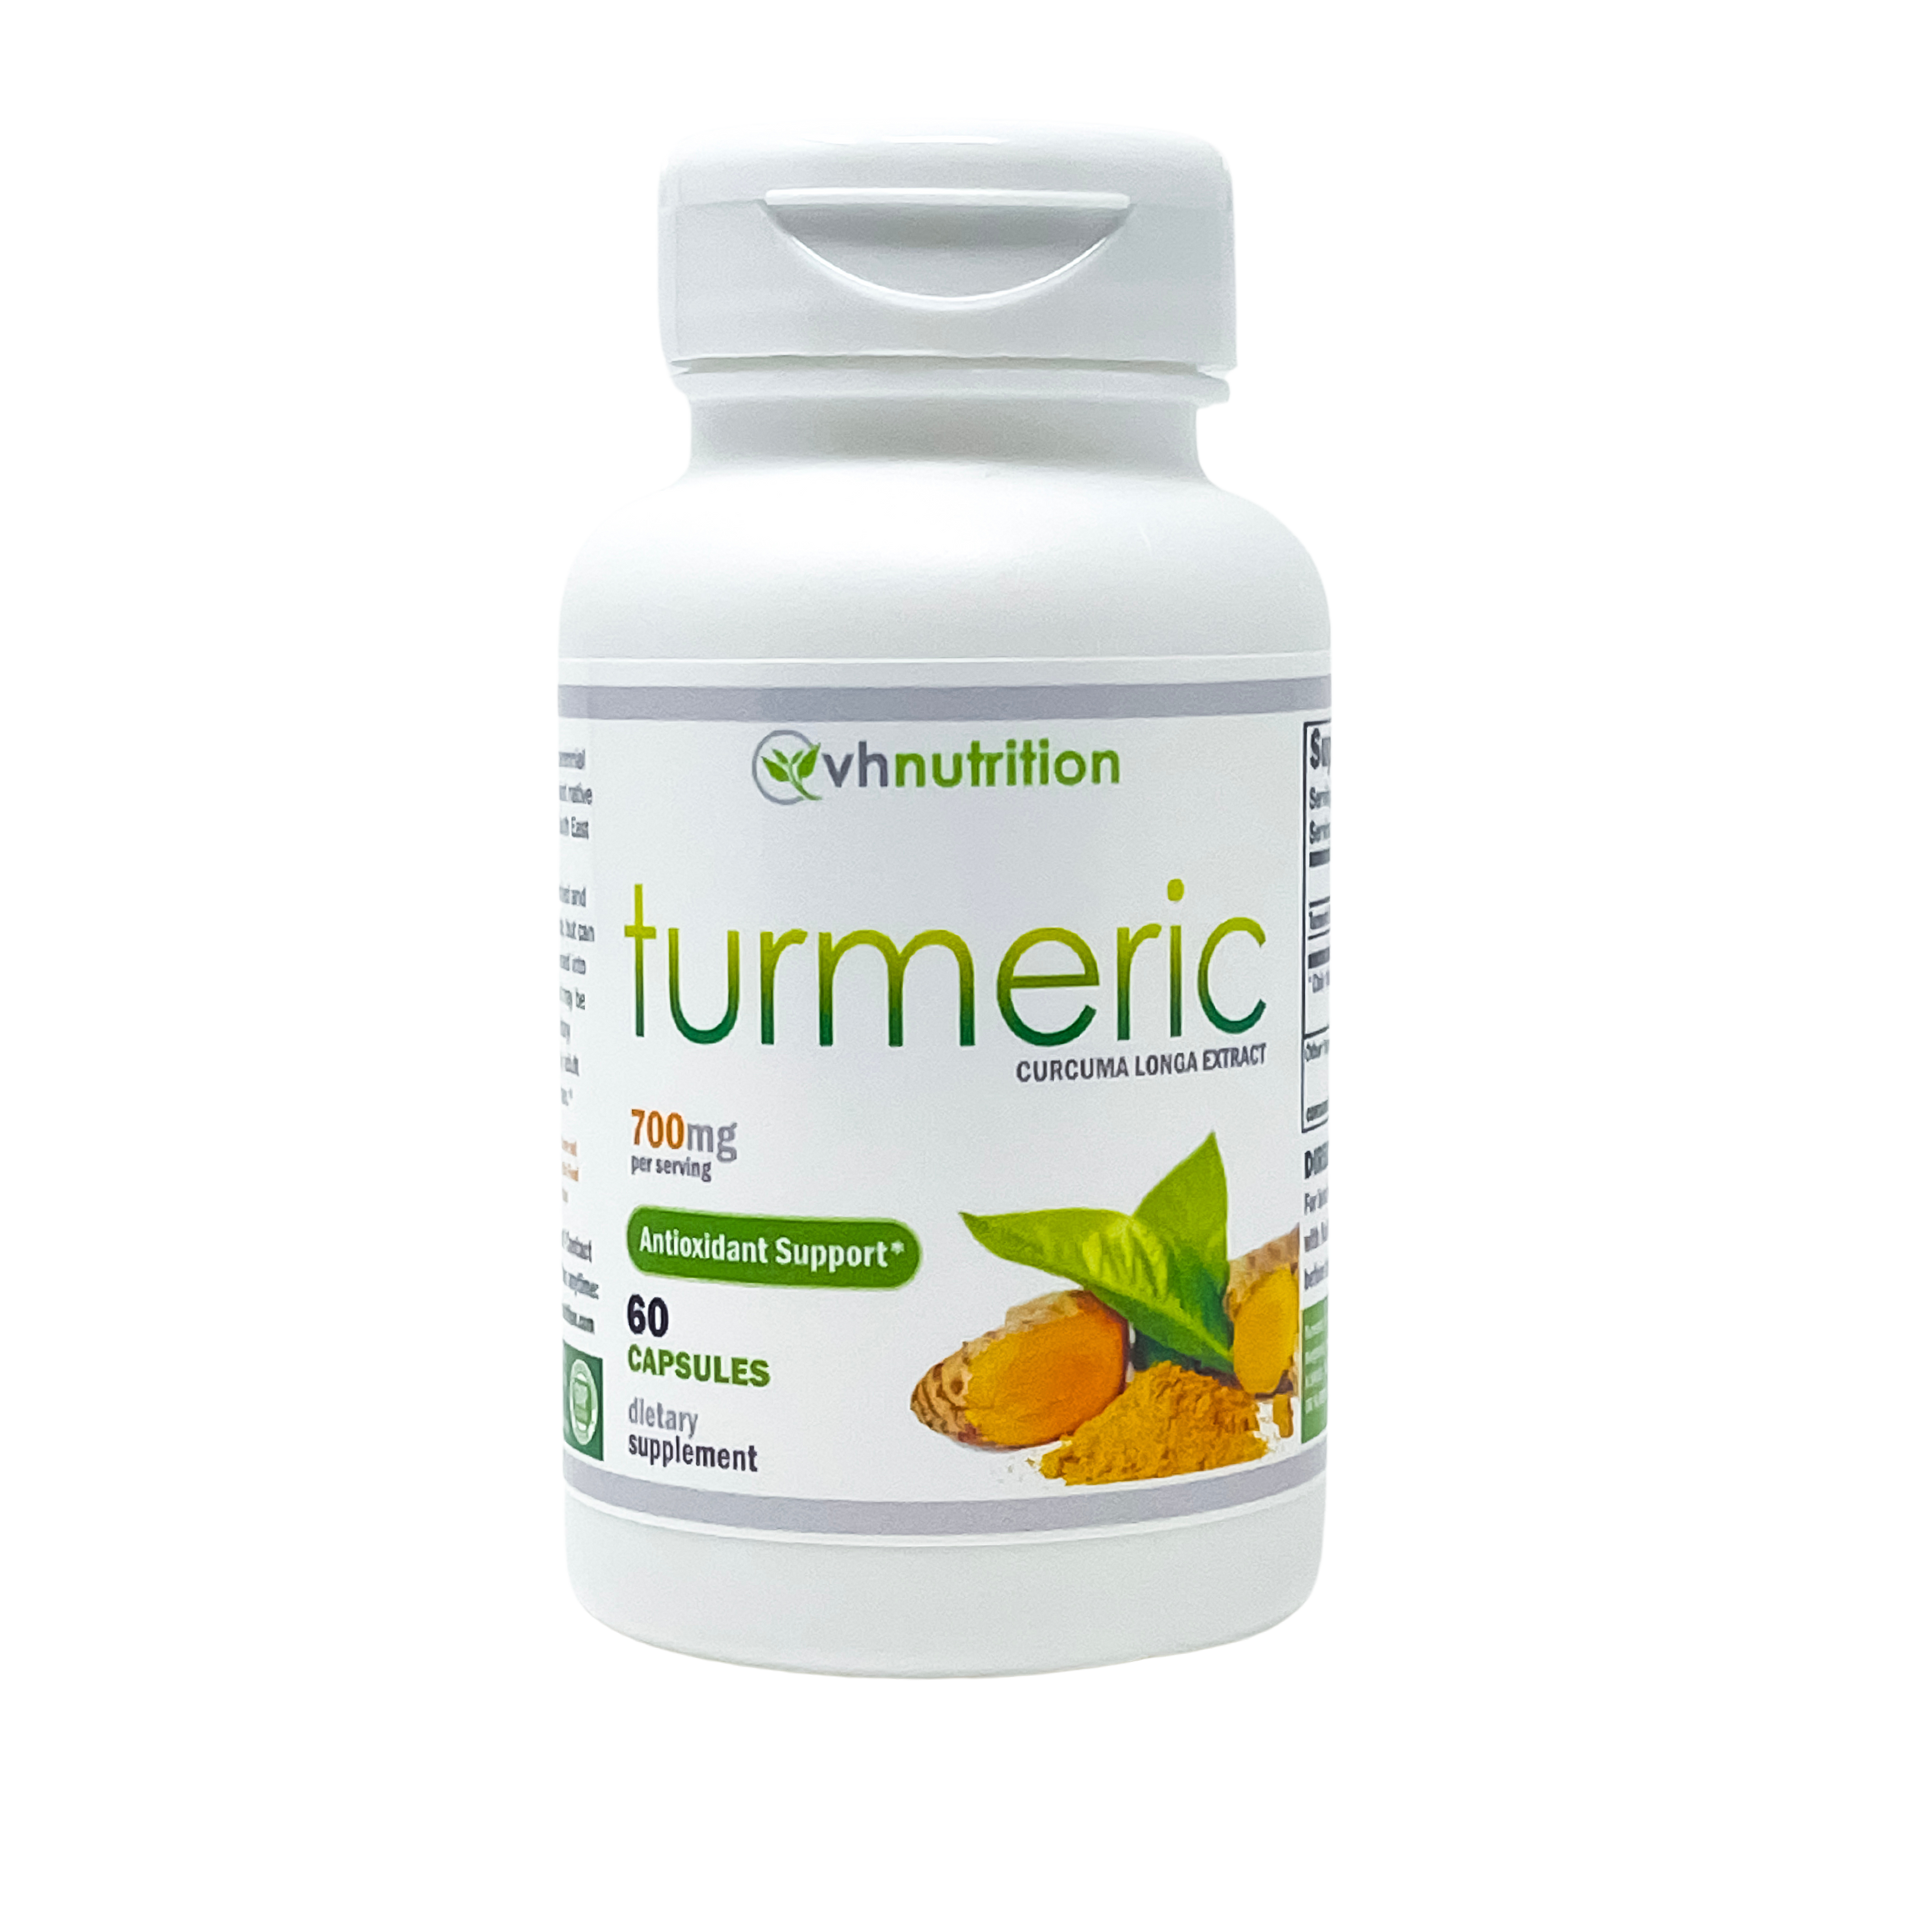 VH Nutrition TURMERIC | Curcuma longa Capsules | Inflammation and Antioxidant Support Supplement for Women & Men* | 700mg per serving 60 Capsules | Standardized Turmeric Extract